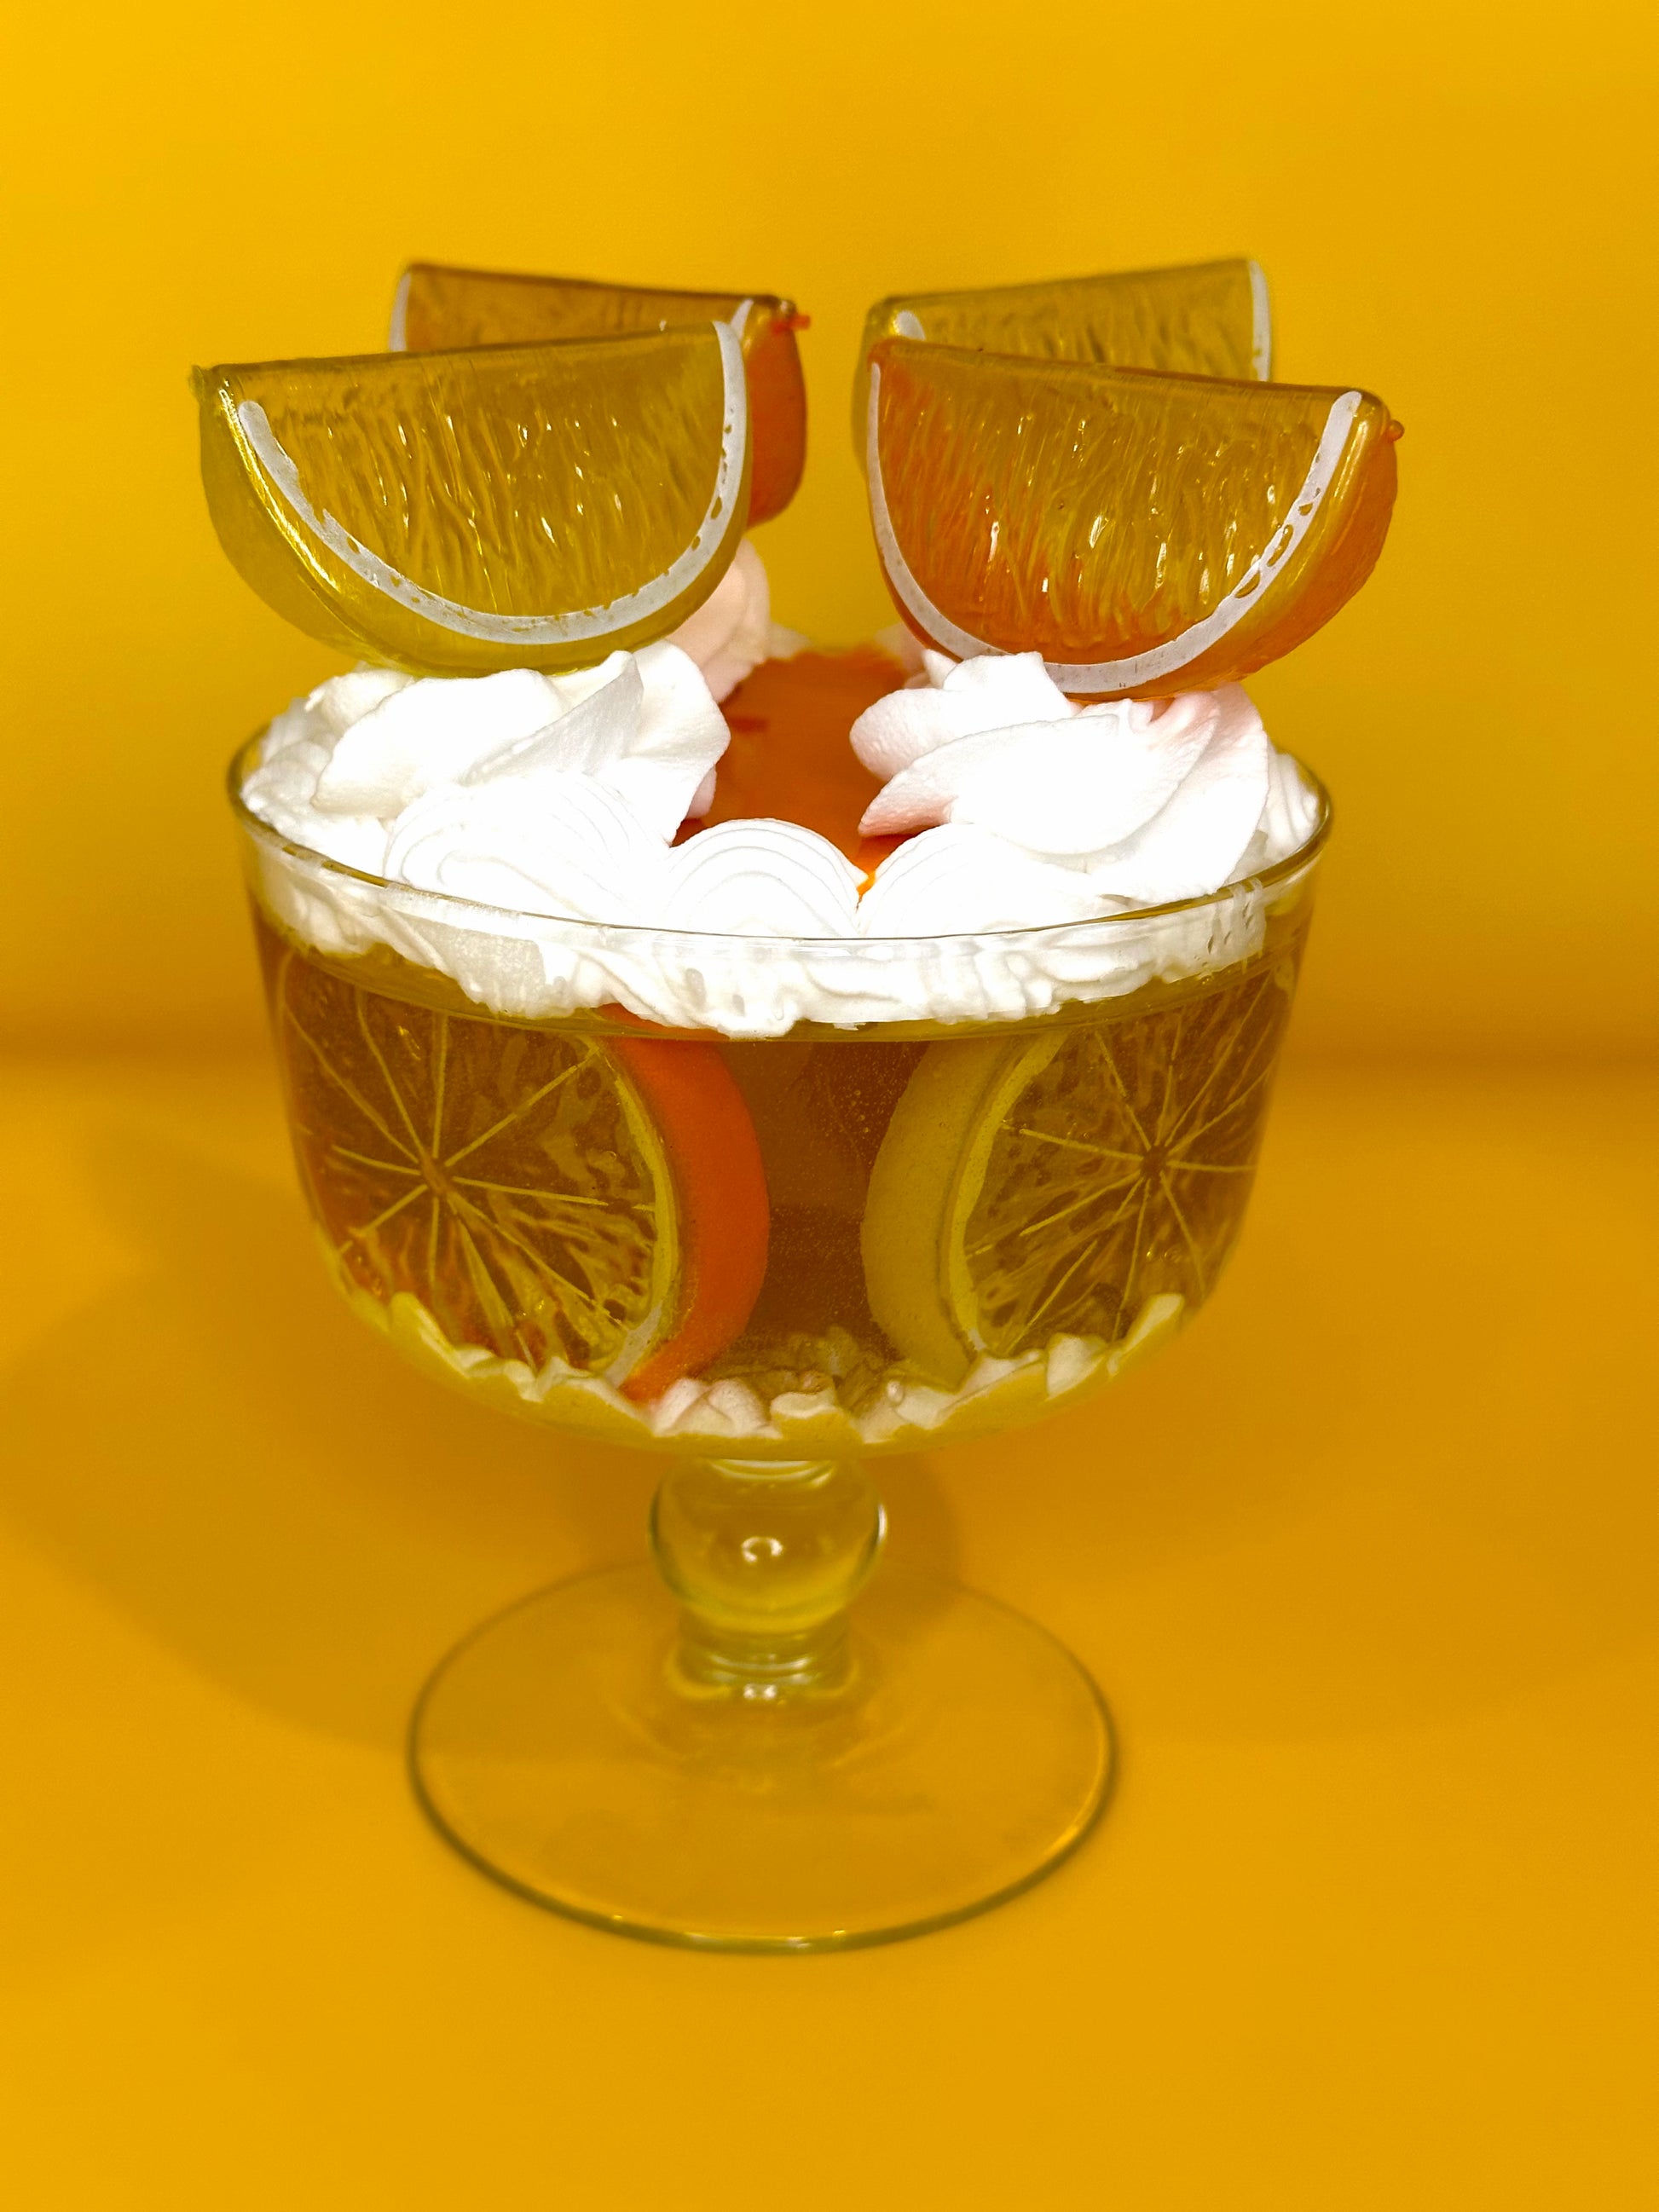 Lemon and Orange Jello in Glass Fruit on Top with Whip Cream and in a Vintage Glass Dish